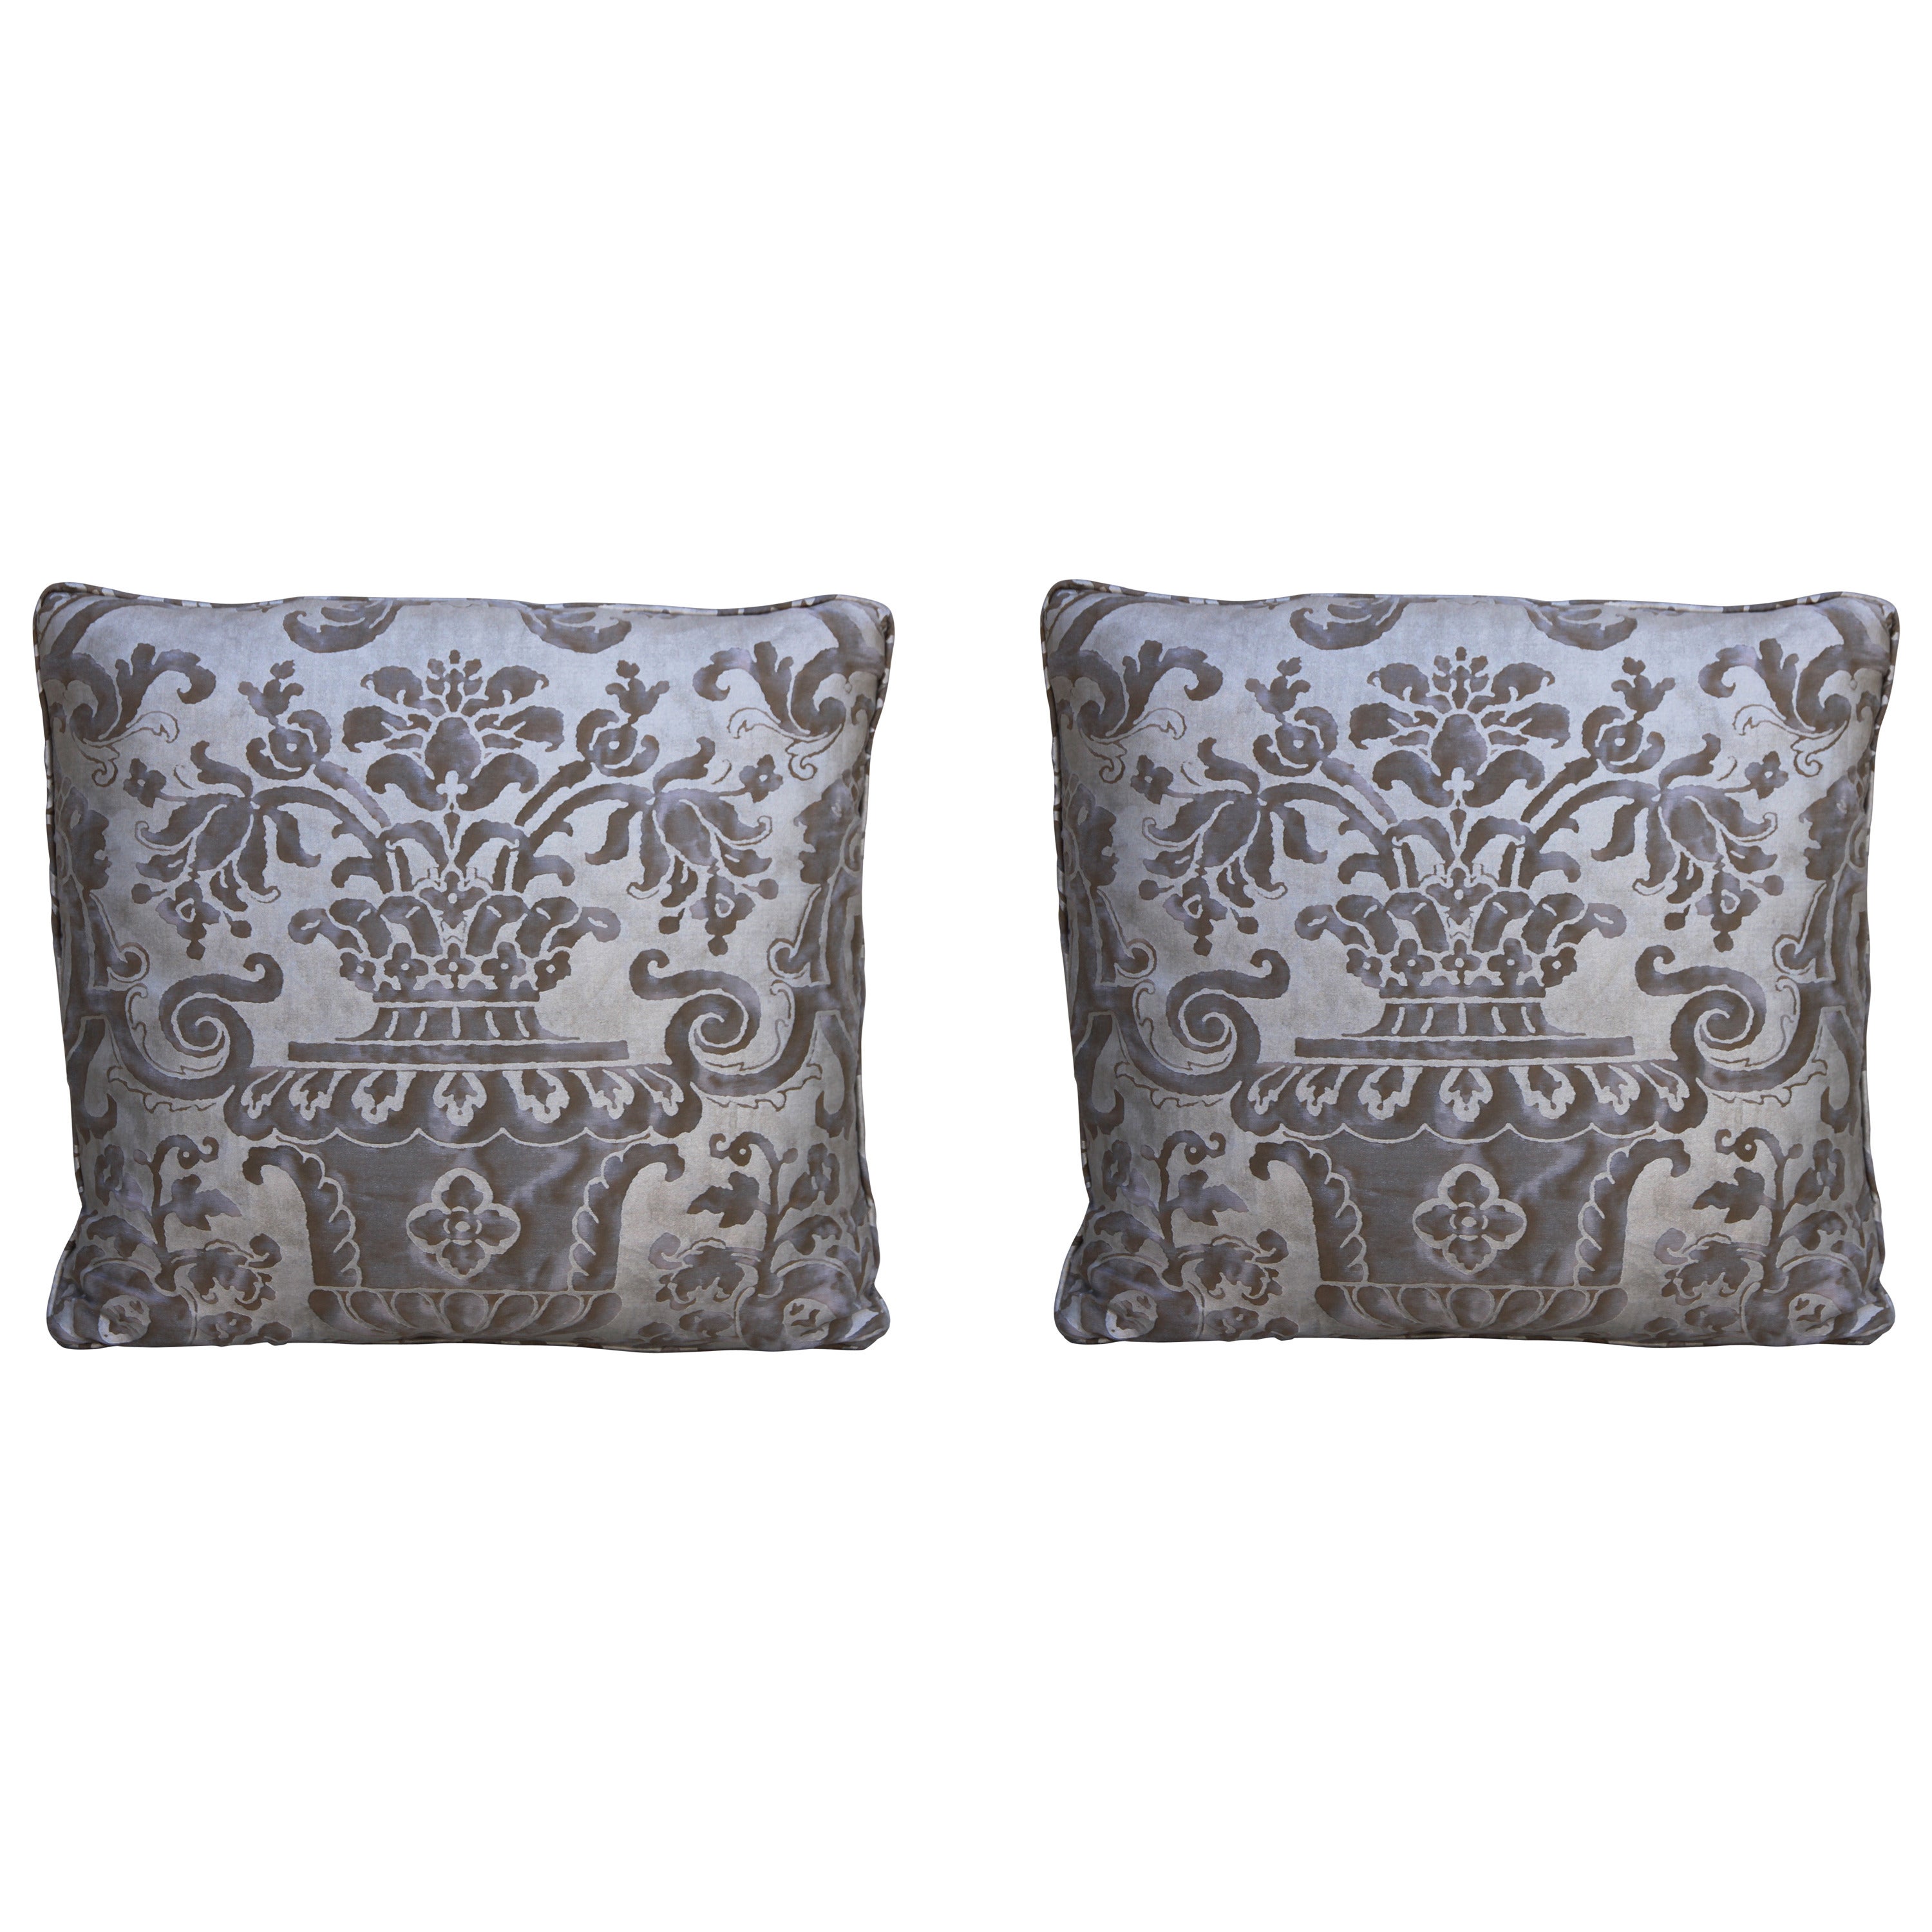 Pair of Fortuny Carnavalet Tan and Silvery Gold Pillows